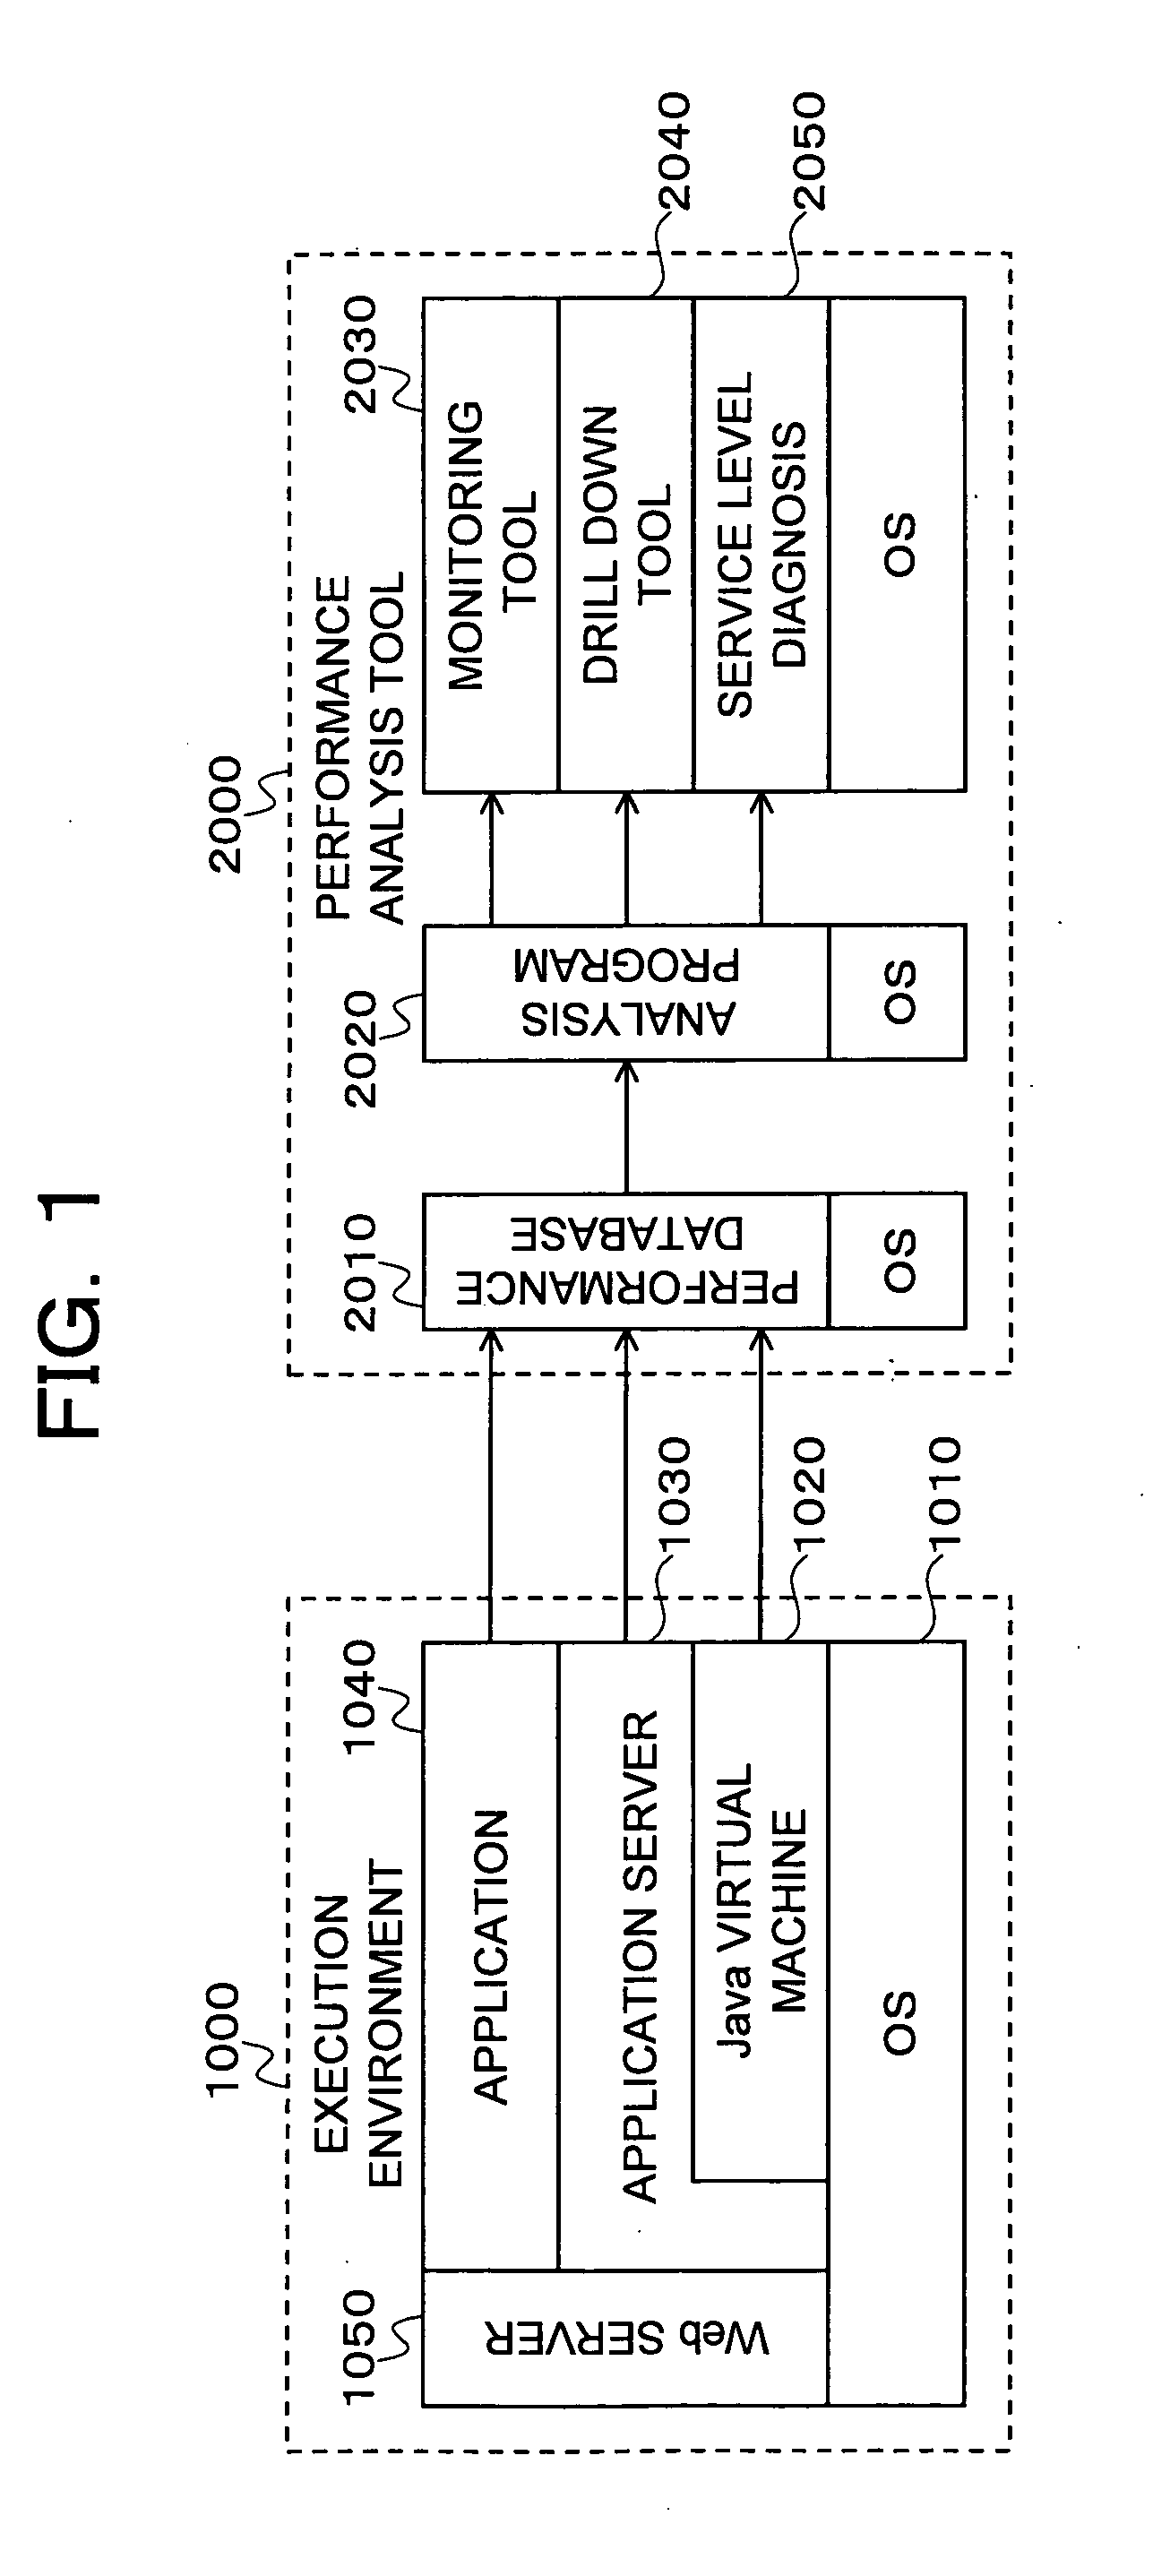 Method for predicting and avoiding danger in execution environment